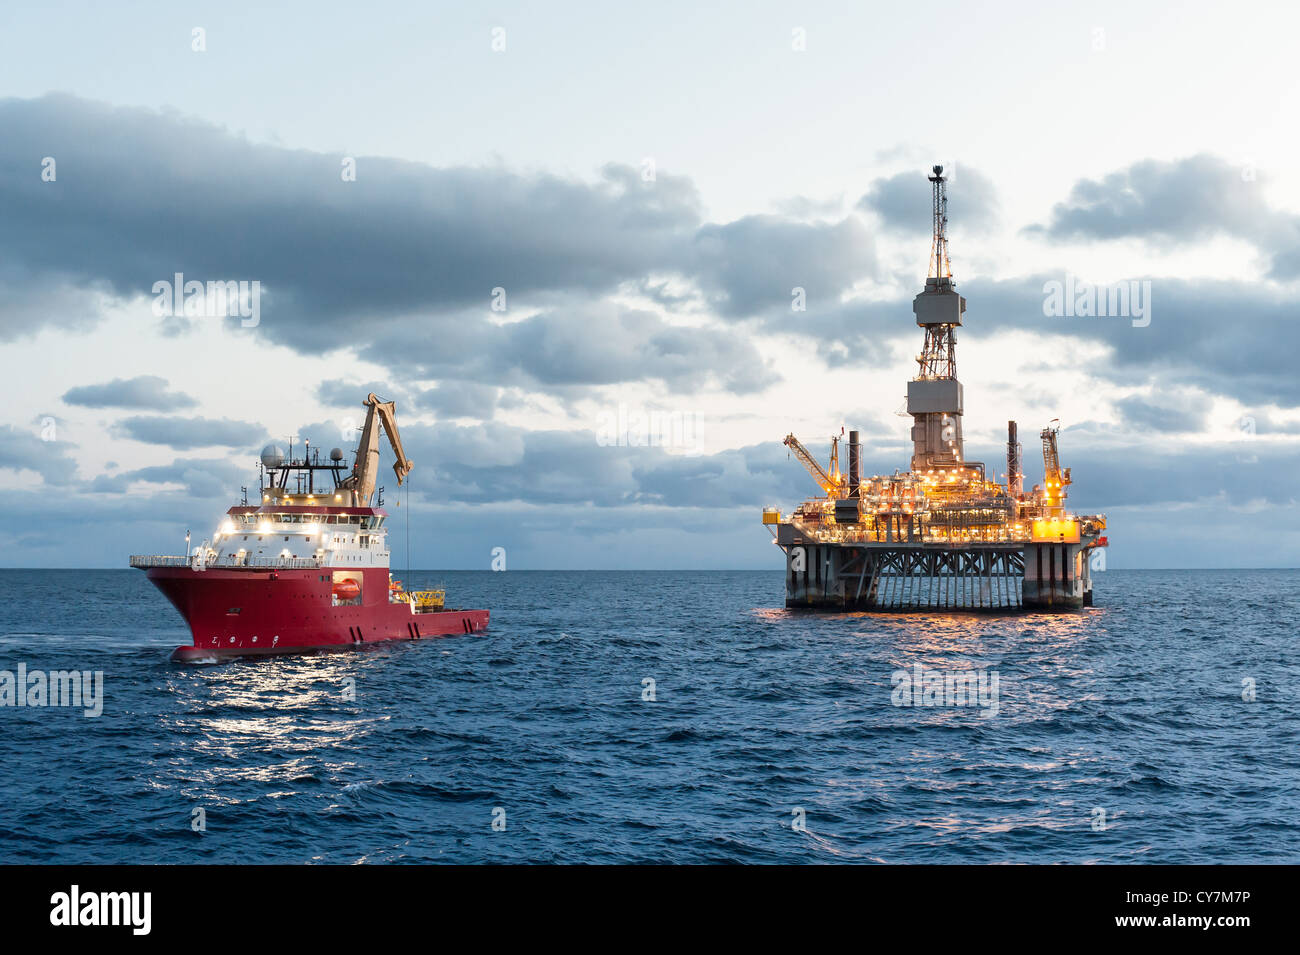 Oil rig with Supply boat in the north Sae Stock Photo